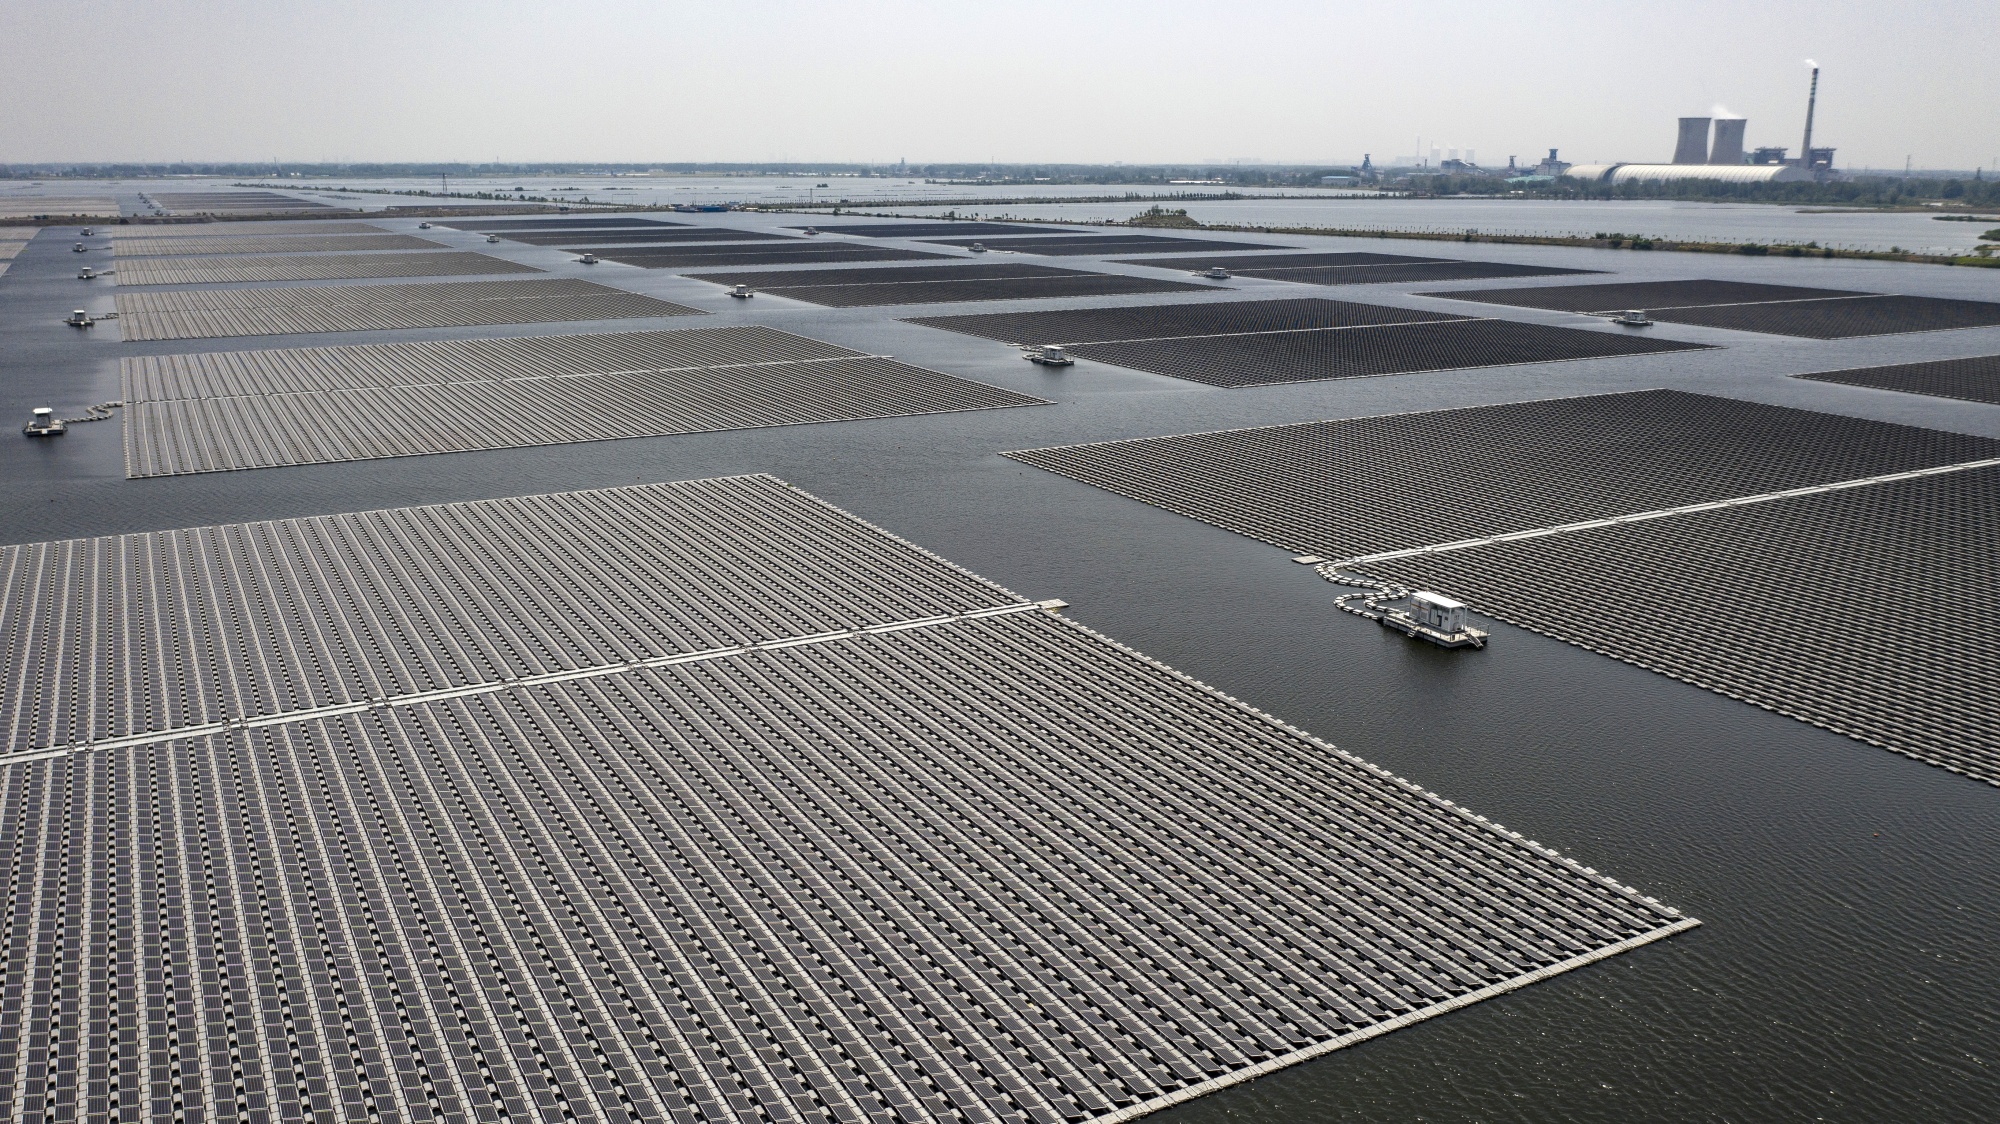 A floating solar farm built on the site of a former coal mine in Huainan.